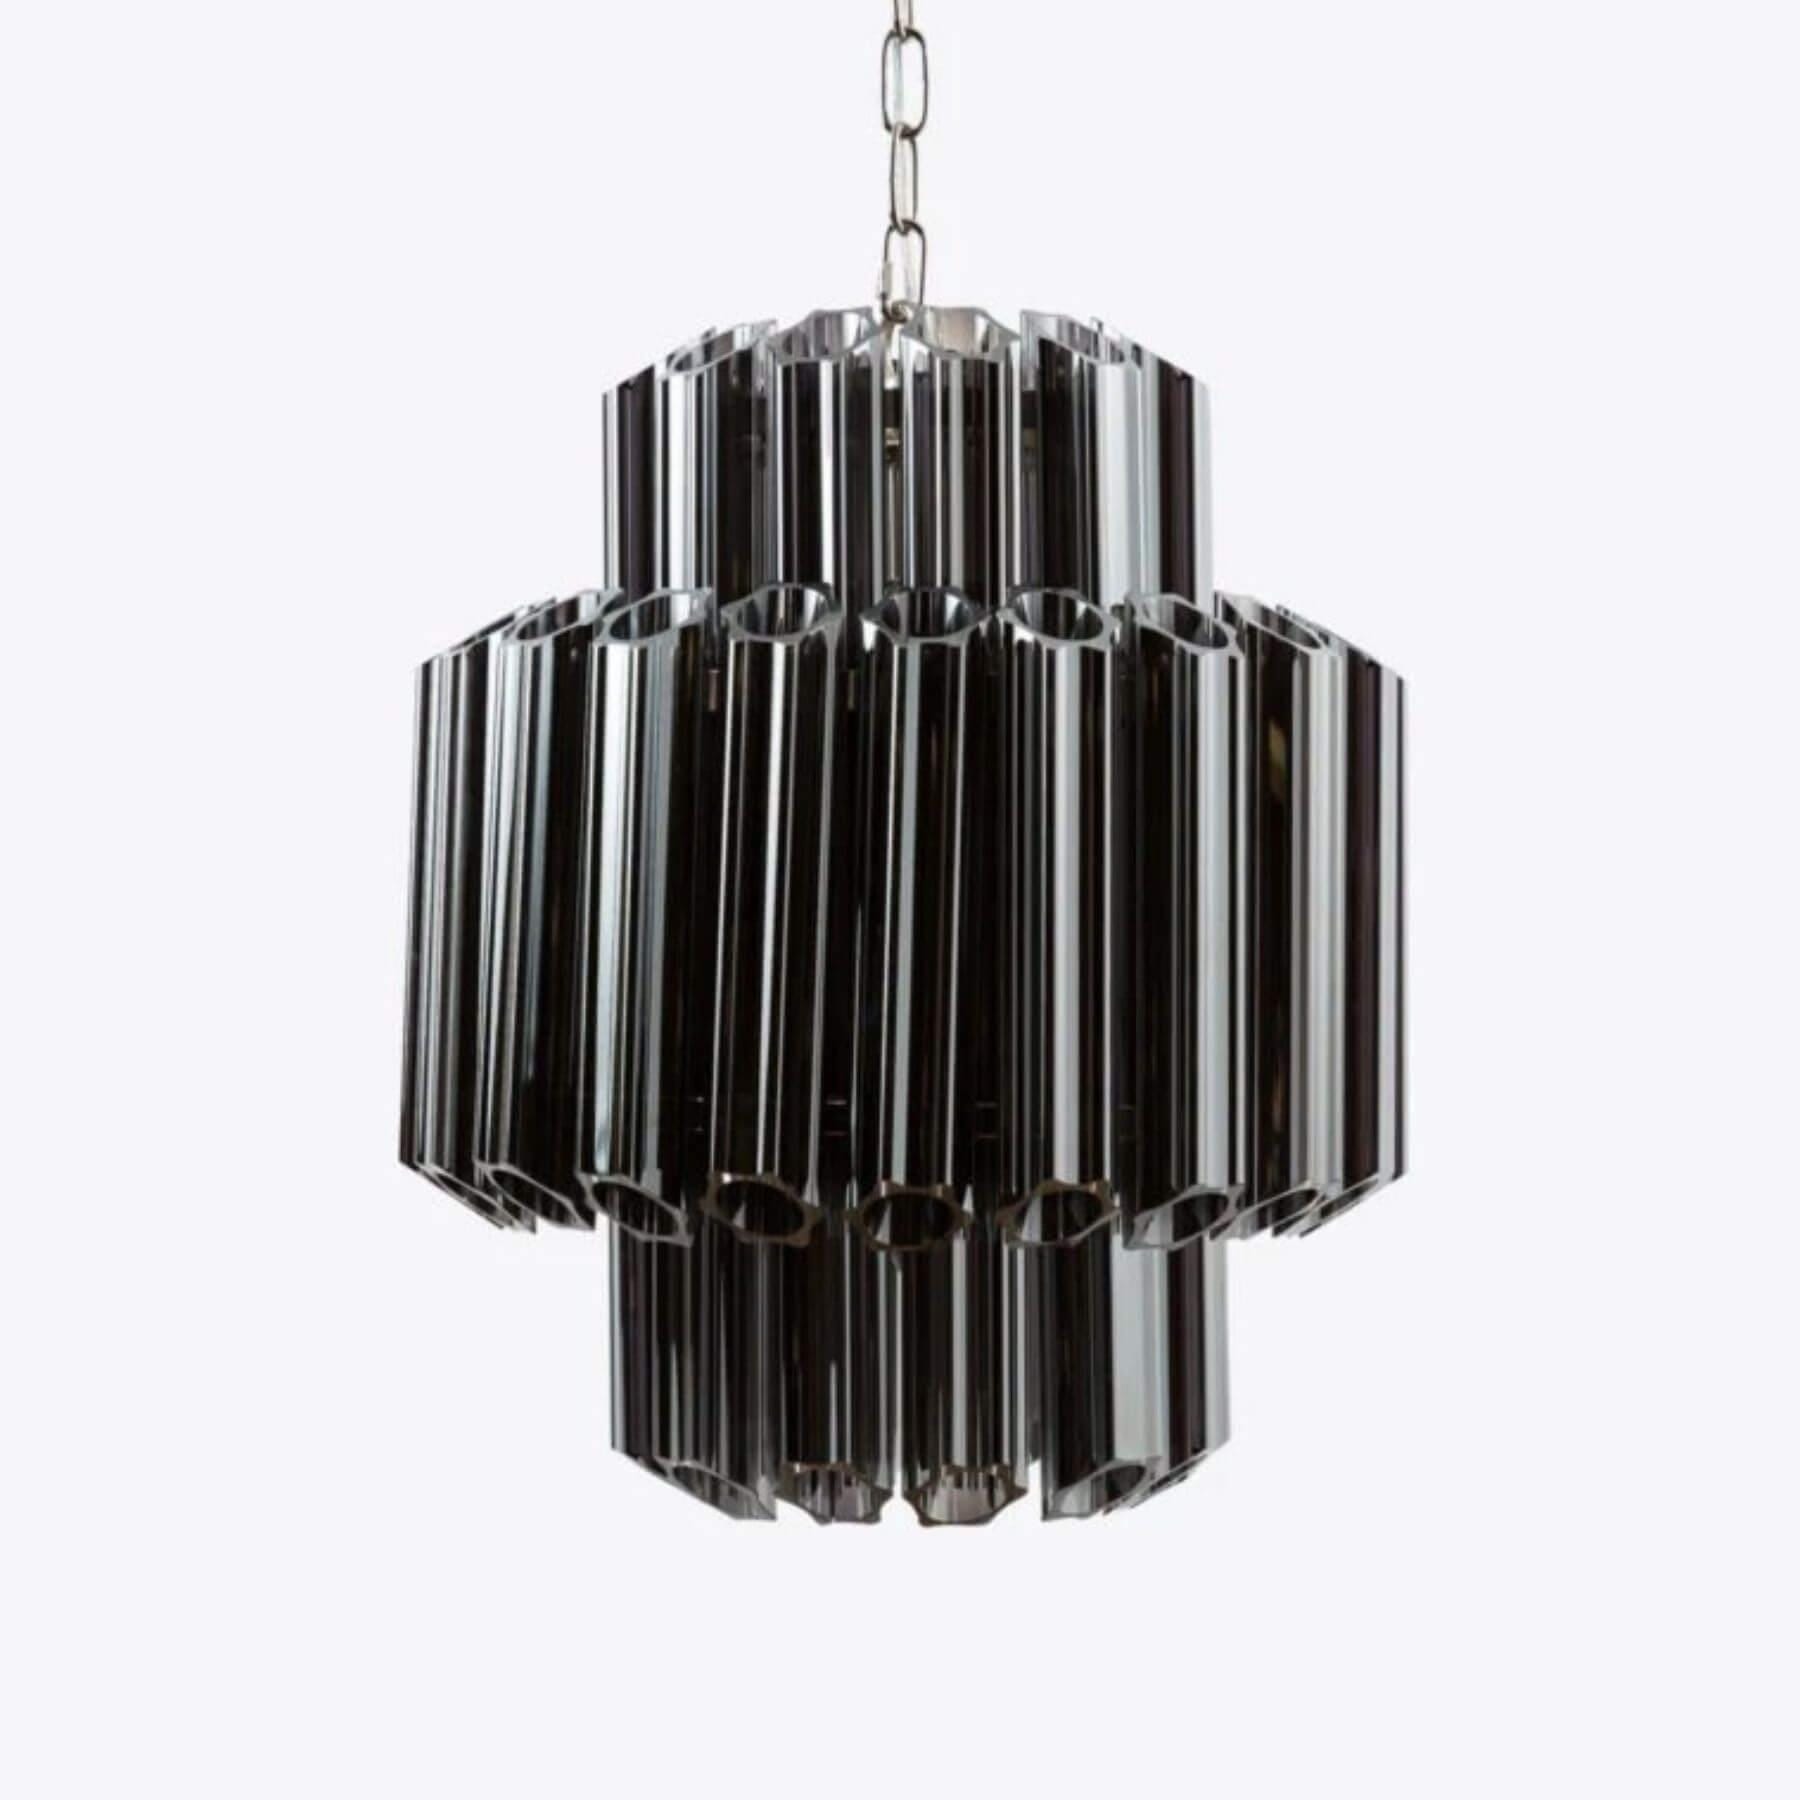 Pure White Lines Piccolo Palermo Chandelier Polished Nickel Smoked Black